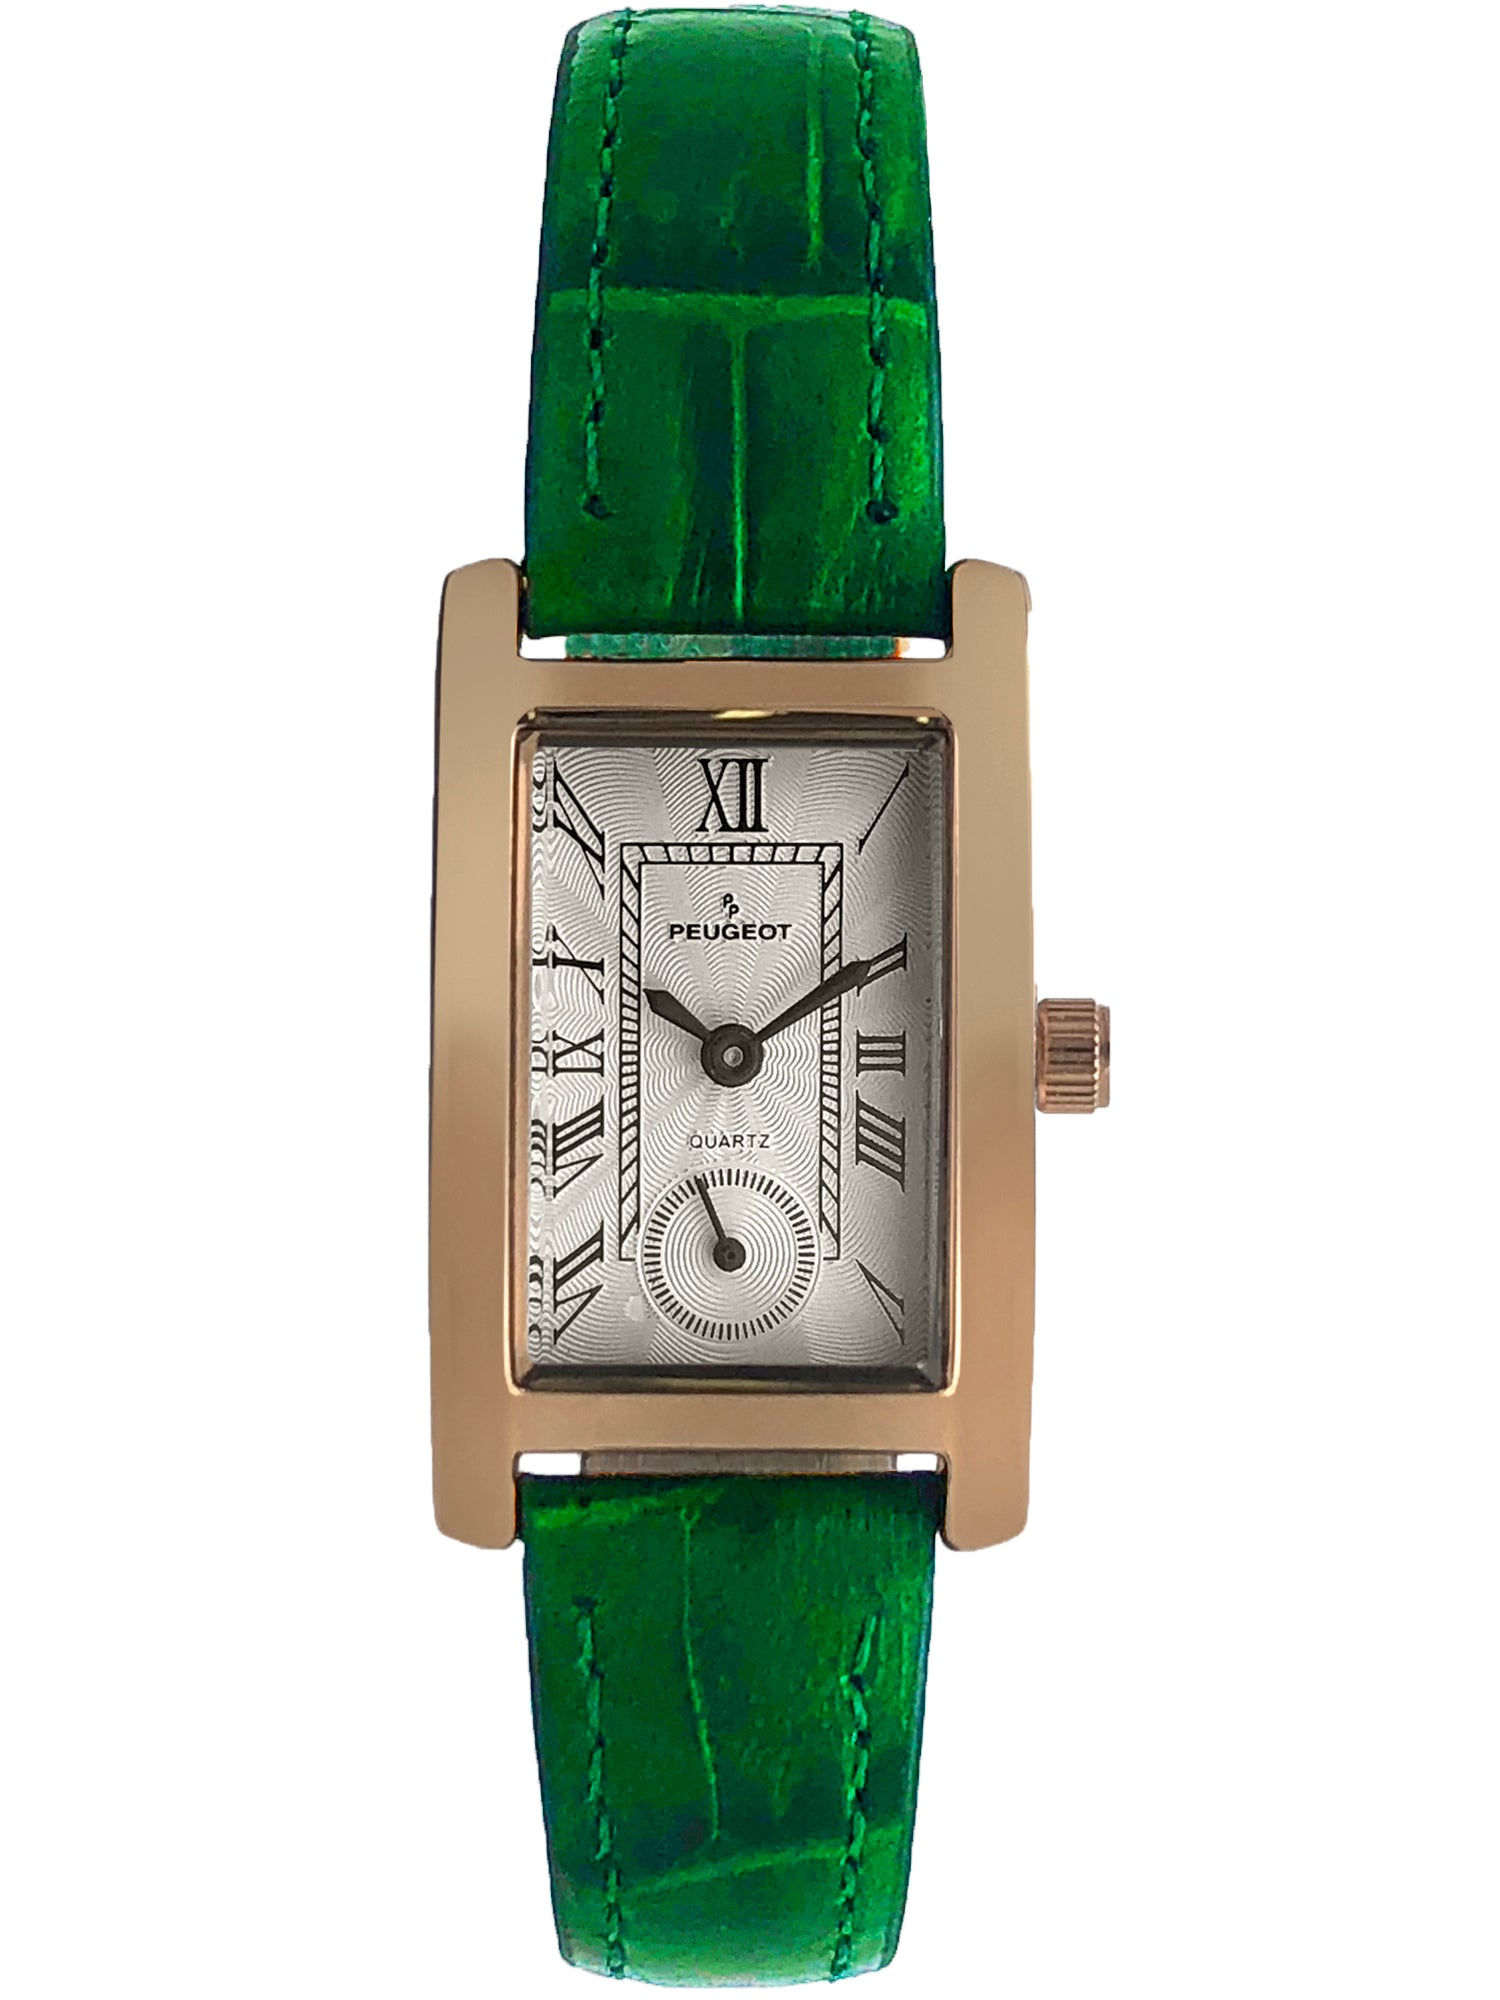 Cartier Tank Quartz Two Tone Black And Grey Roman Numeral Dial Gold Watch, Cartier